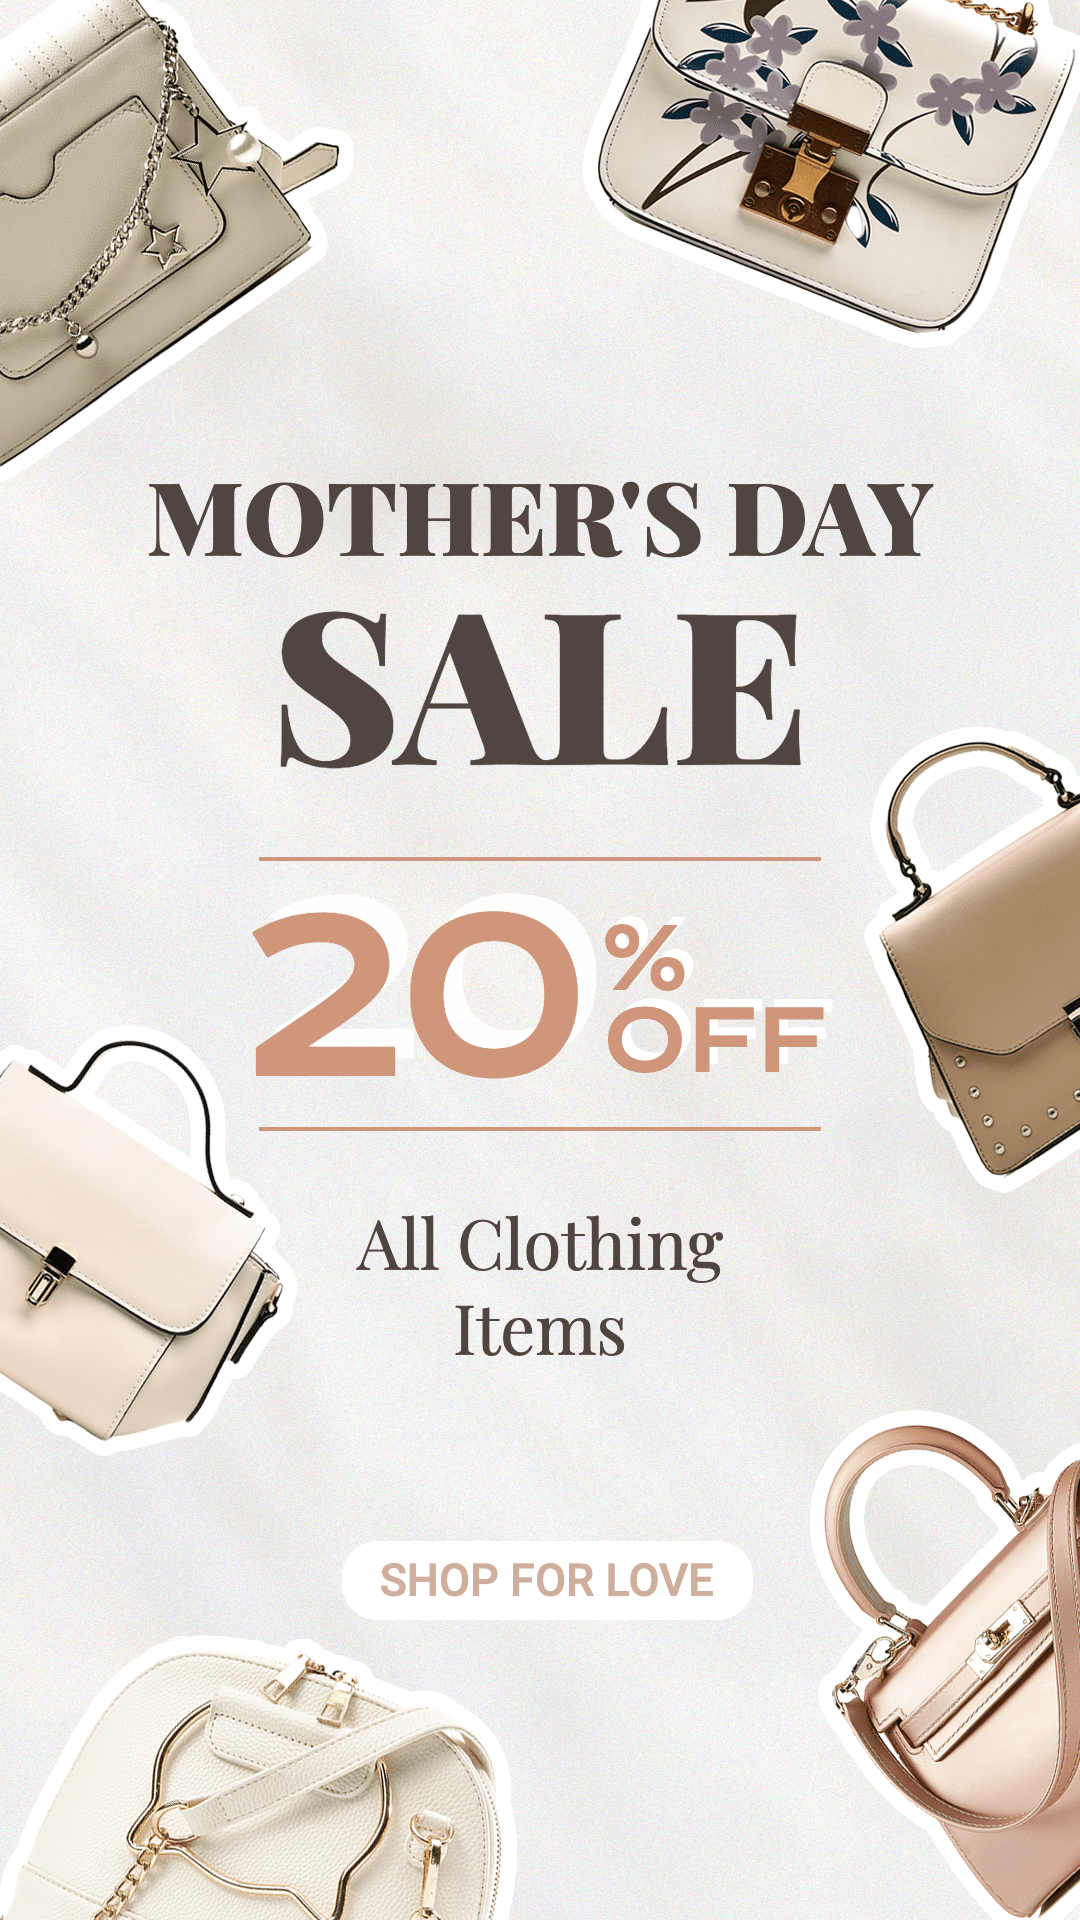 Mother's Day Women's Fahion Sale Promotion Ecommerce Story